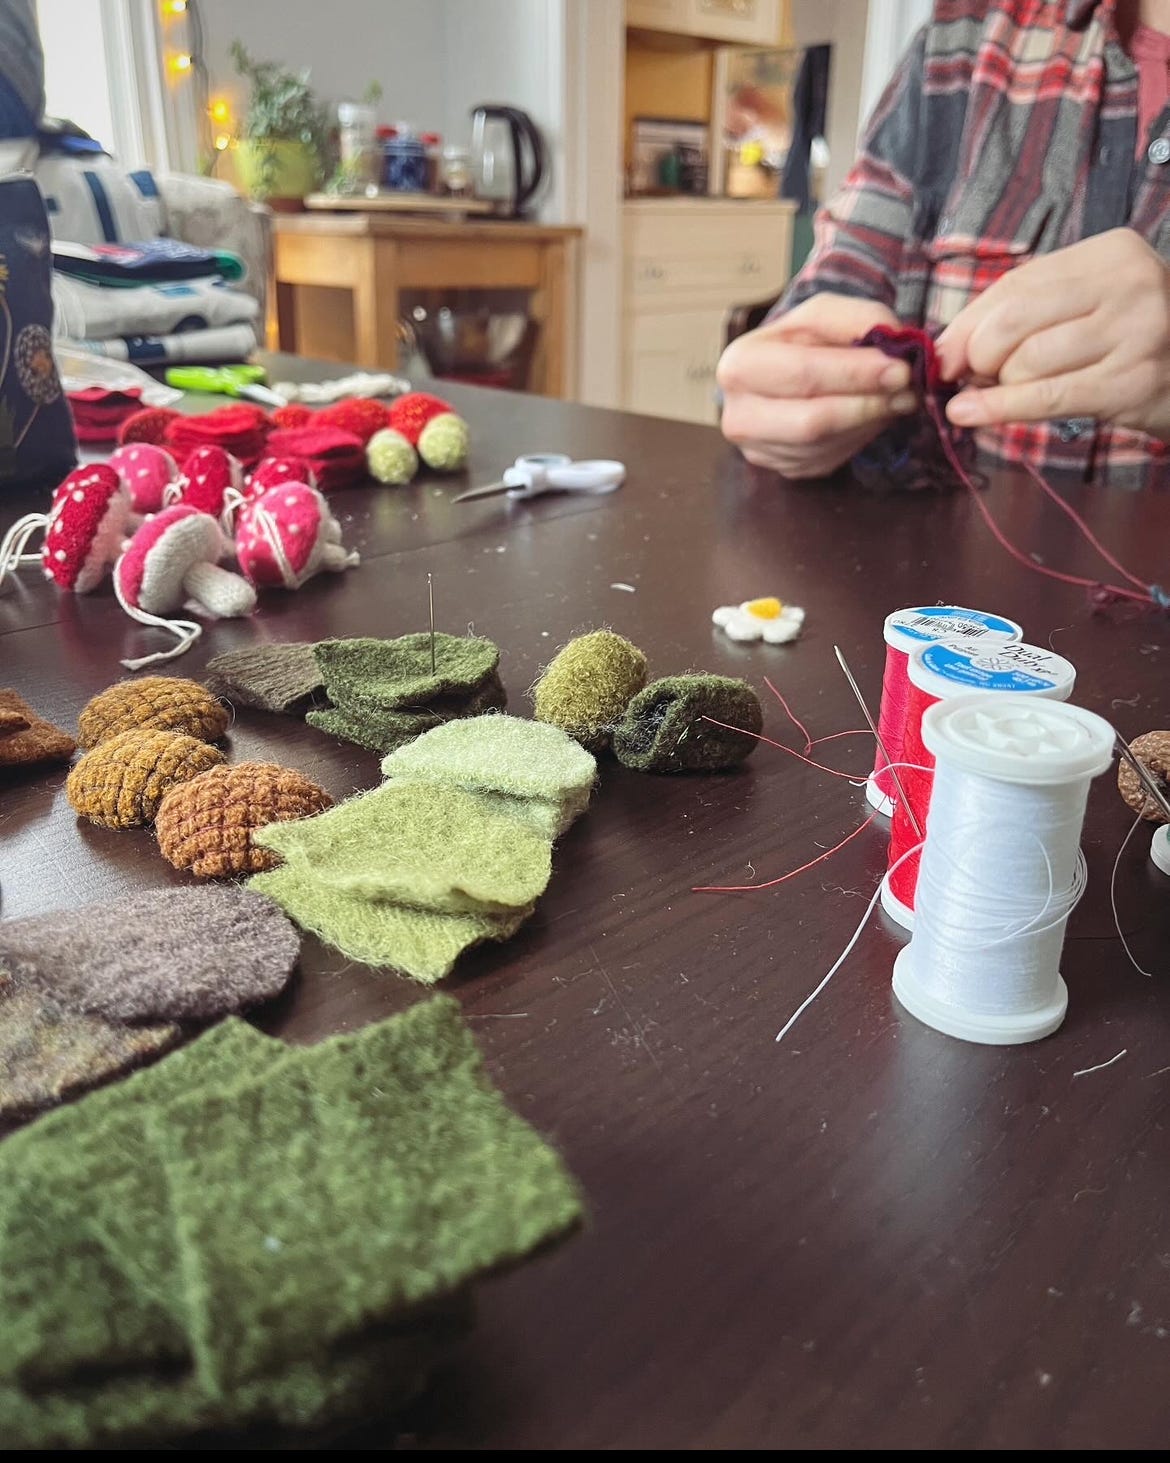 A dining room table covered with crafting supplies, including bits of felt, spools of thread, and some already finished crafts, including tiny felt mushroom ornaments.